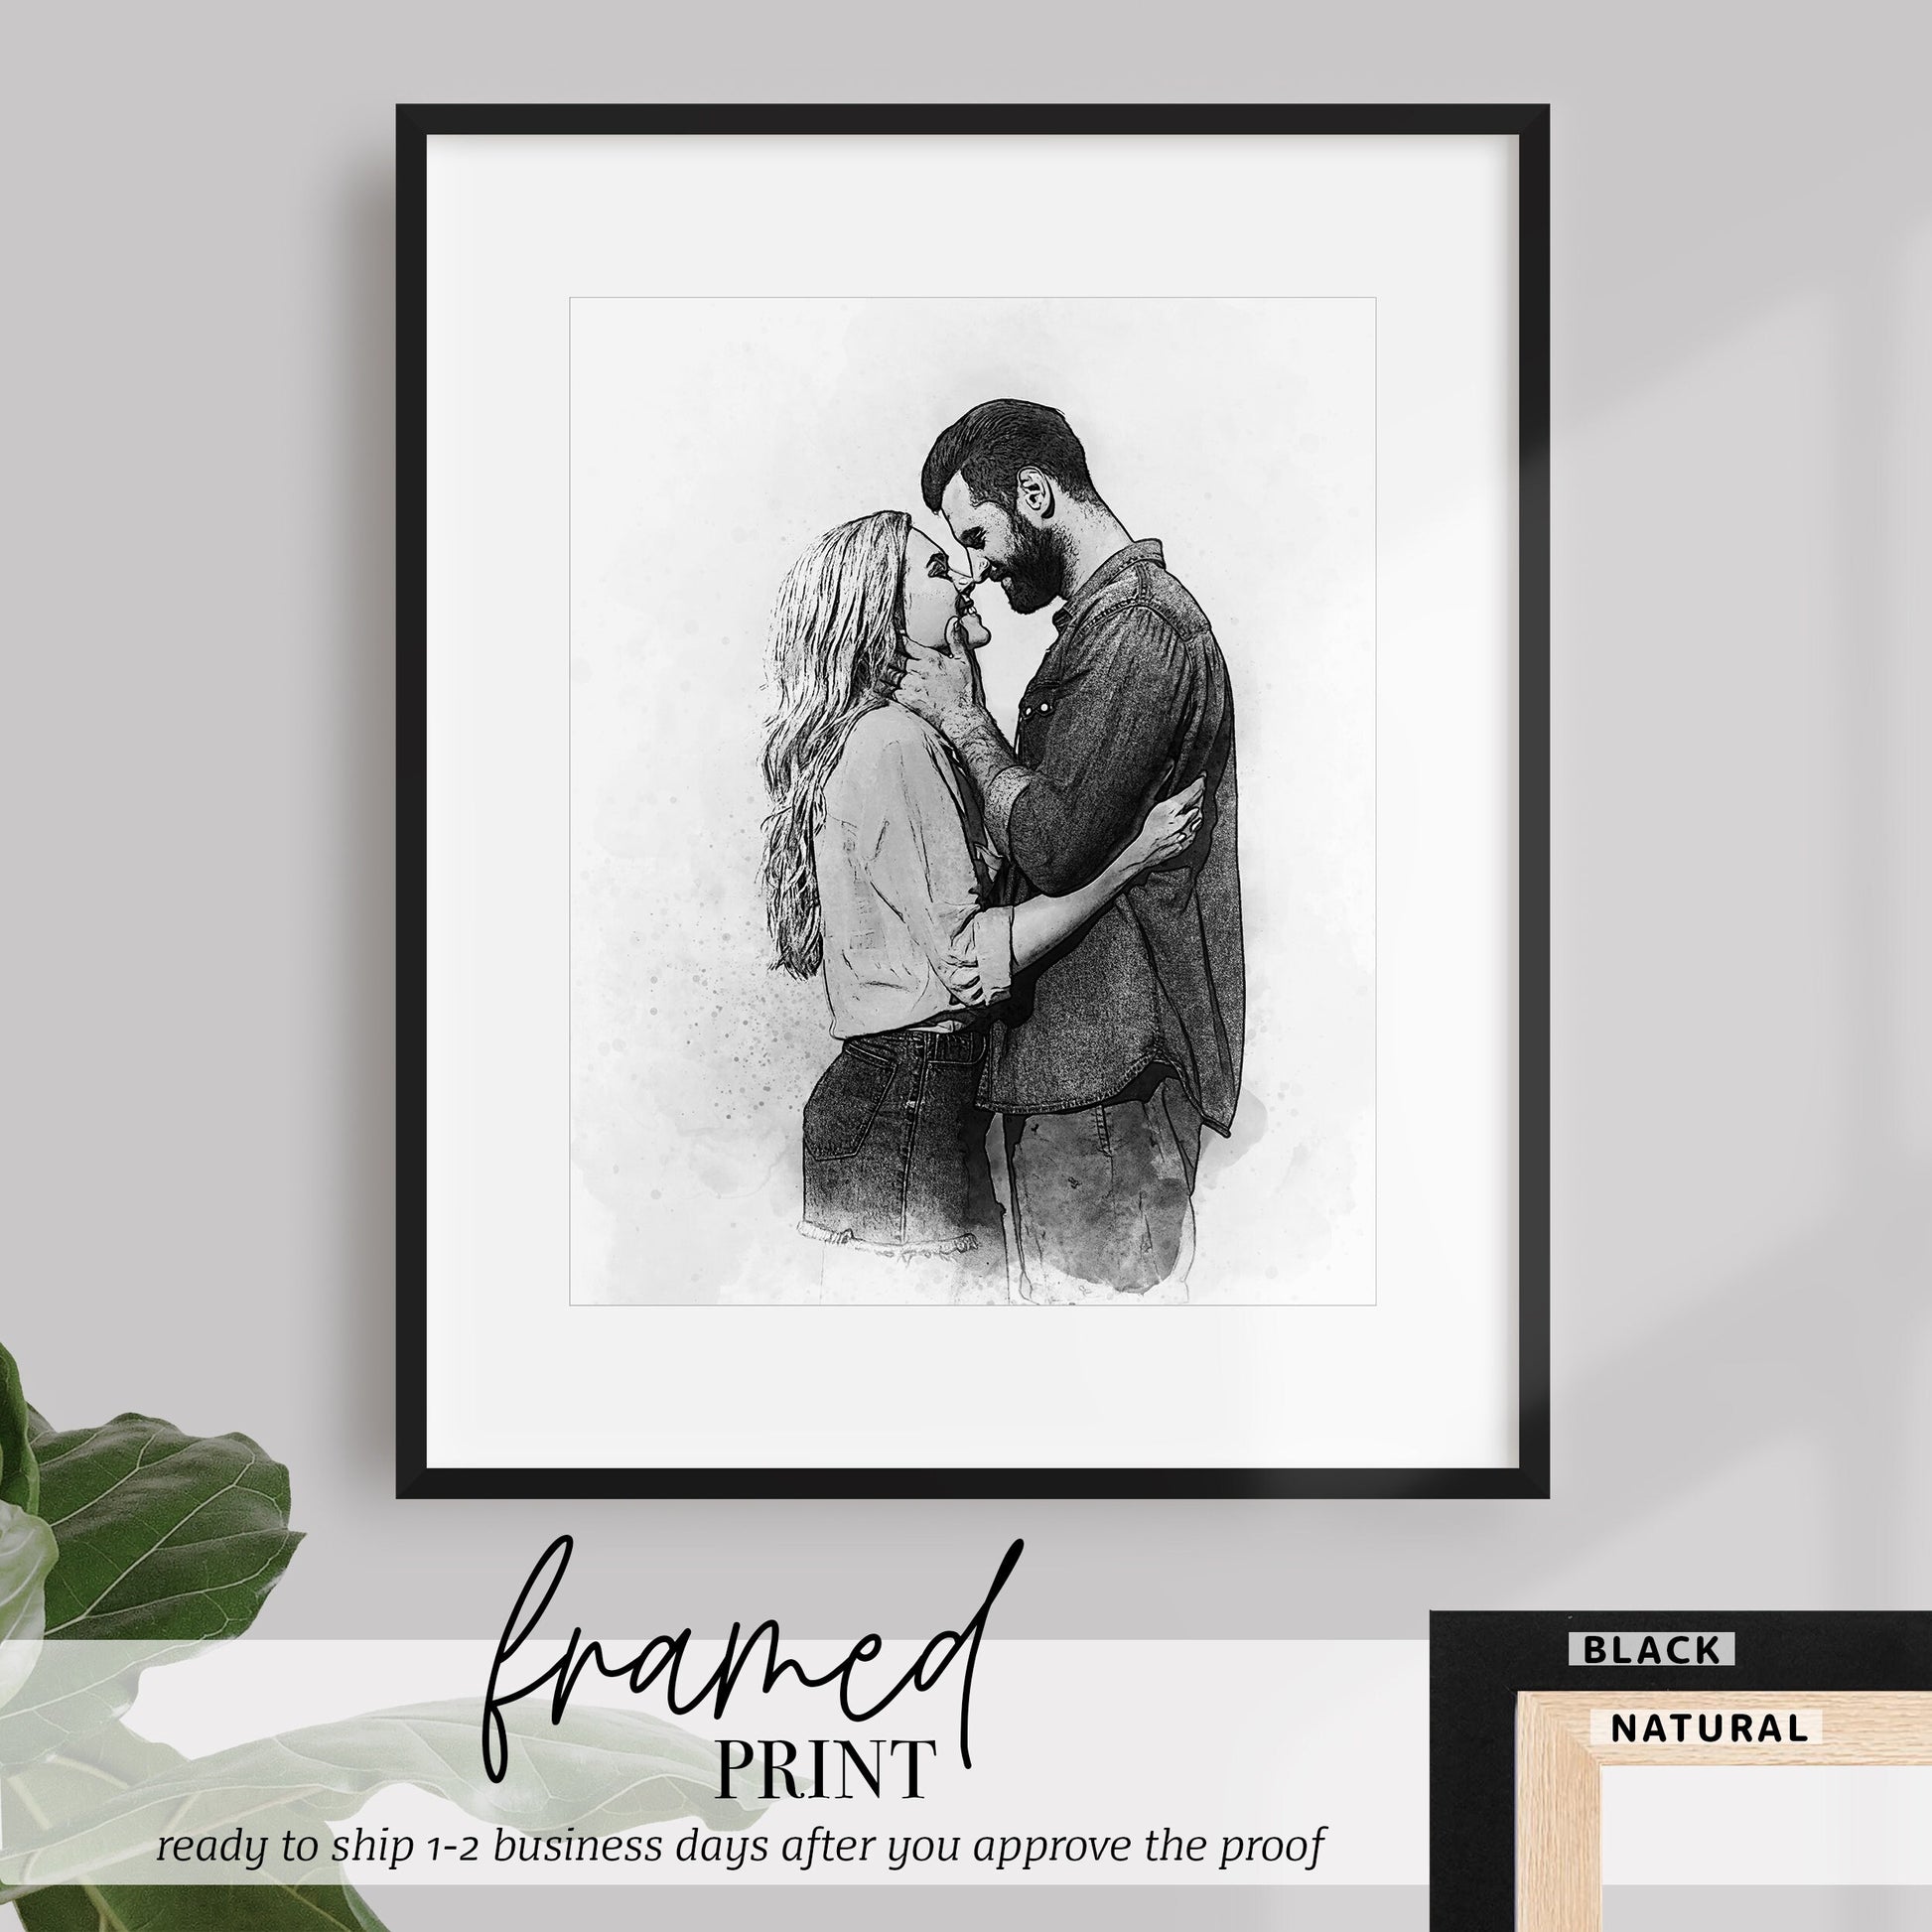 Custom Portrait, Wedding Gift, Anniversary Gifts, Personalized, Couple Portrait, Gift for Her, Gift for Him, Cotton Anniversary Gifts